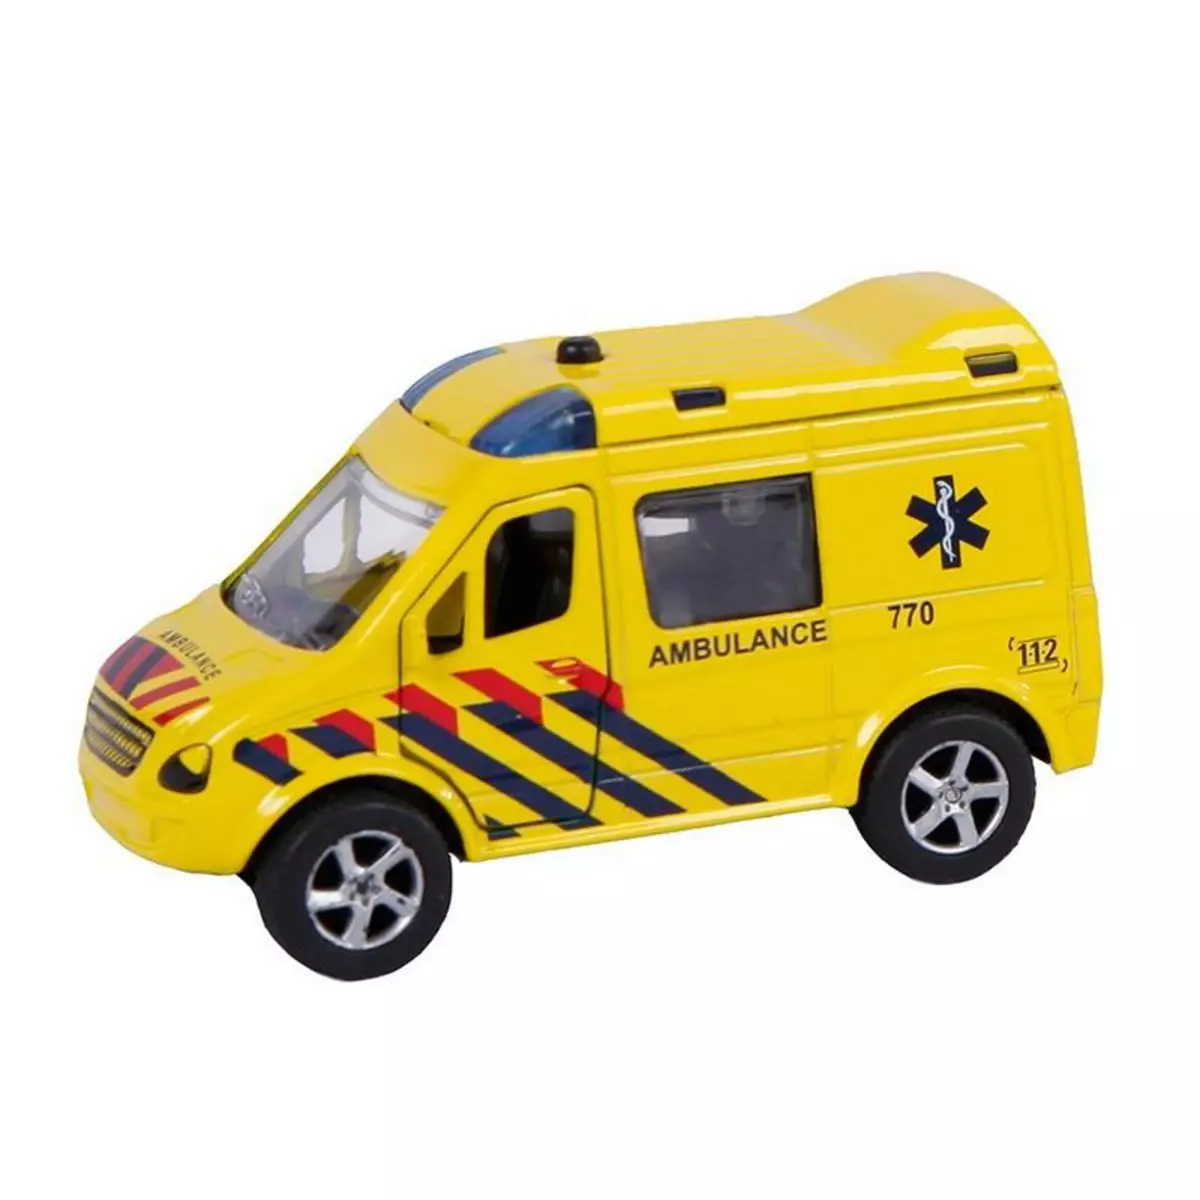 2 PLAY TRAFFIC 2-PLAY TRAFFIC 2-Play Die-cast Pull Back Ambulance NL Light and Sound